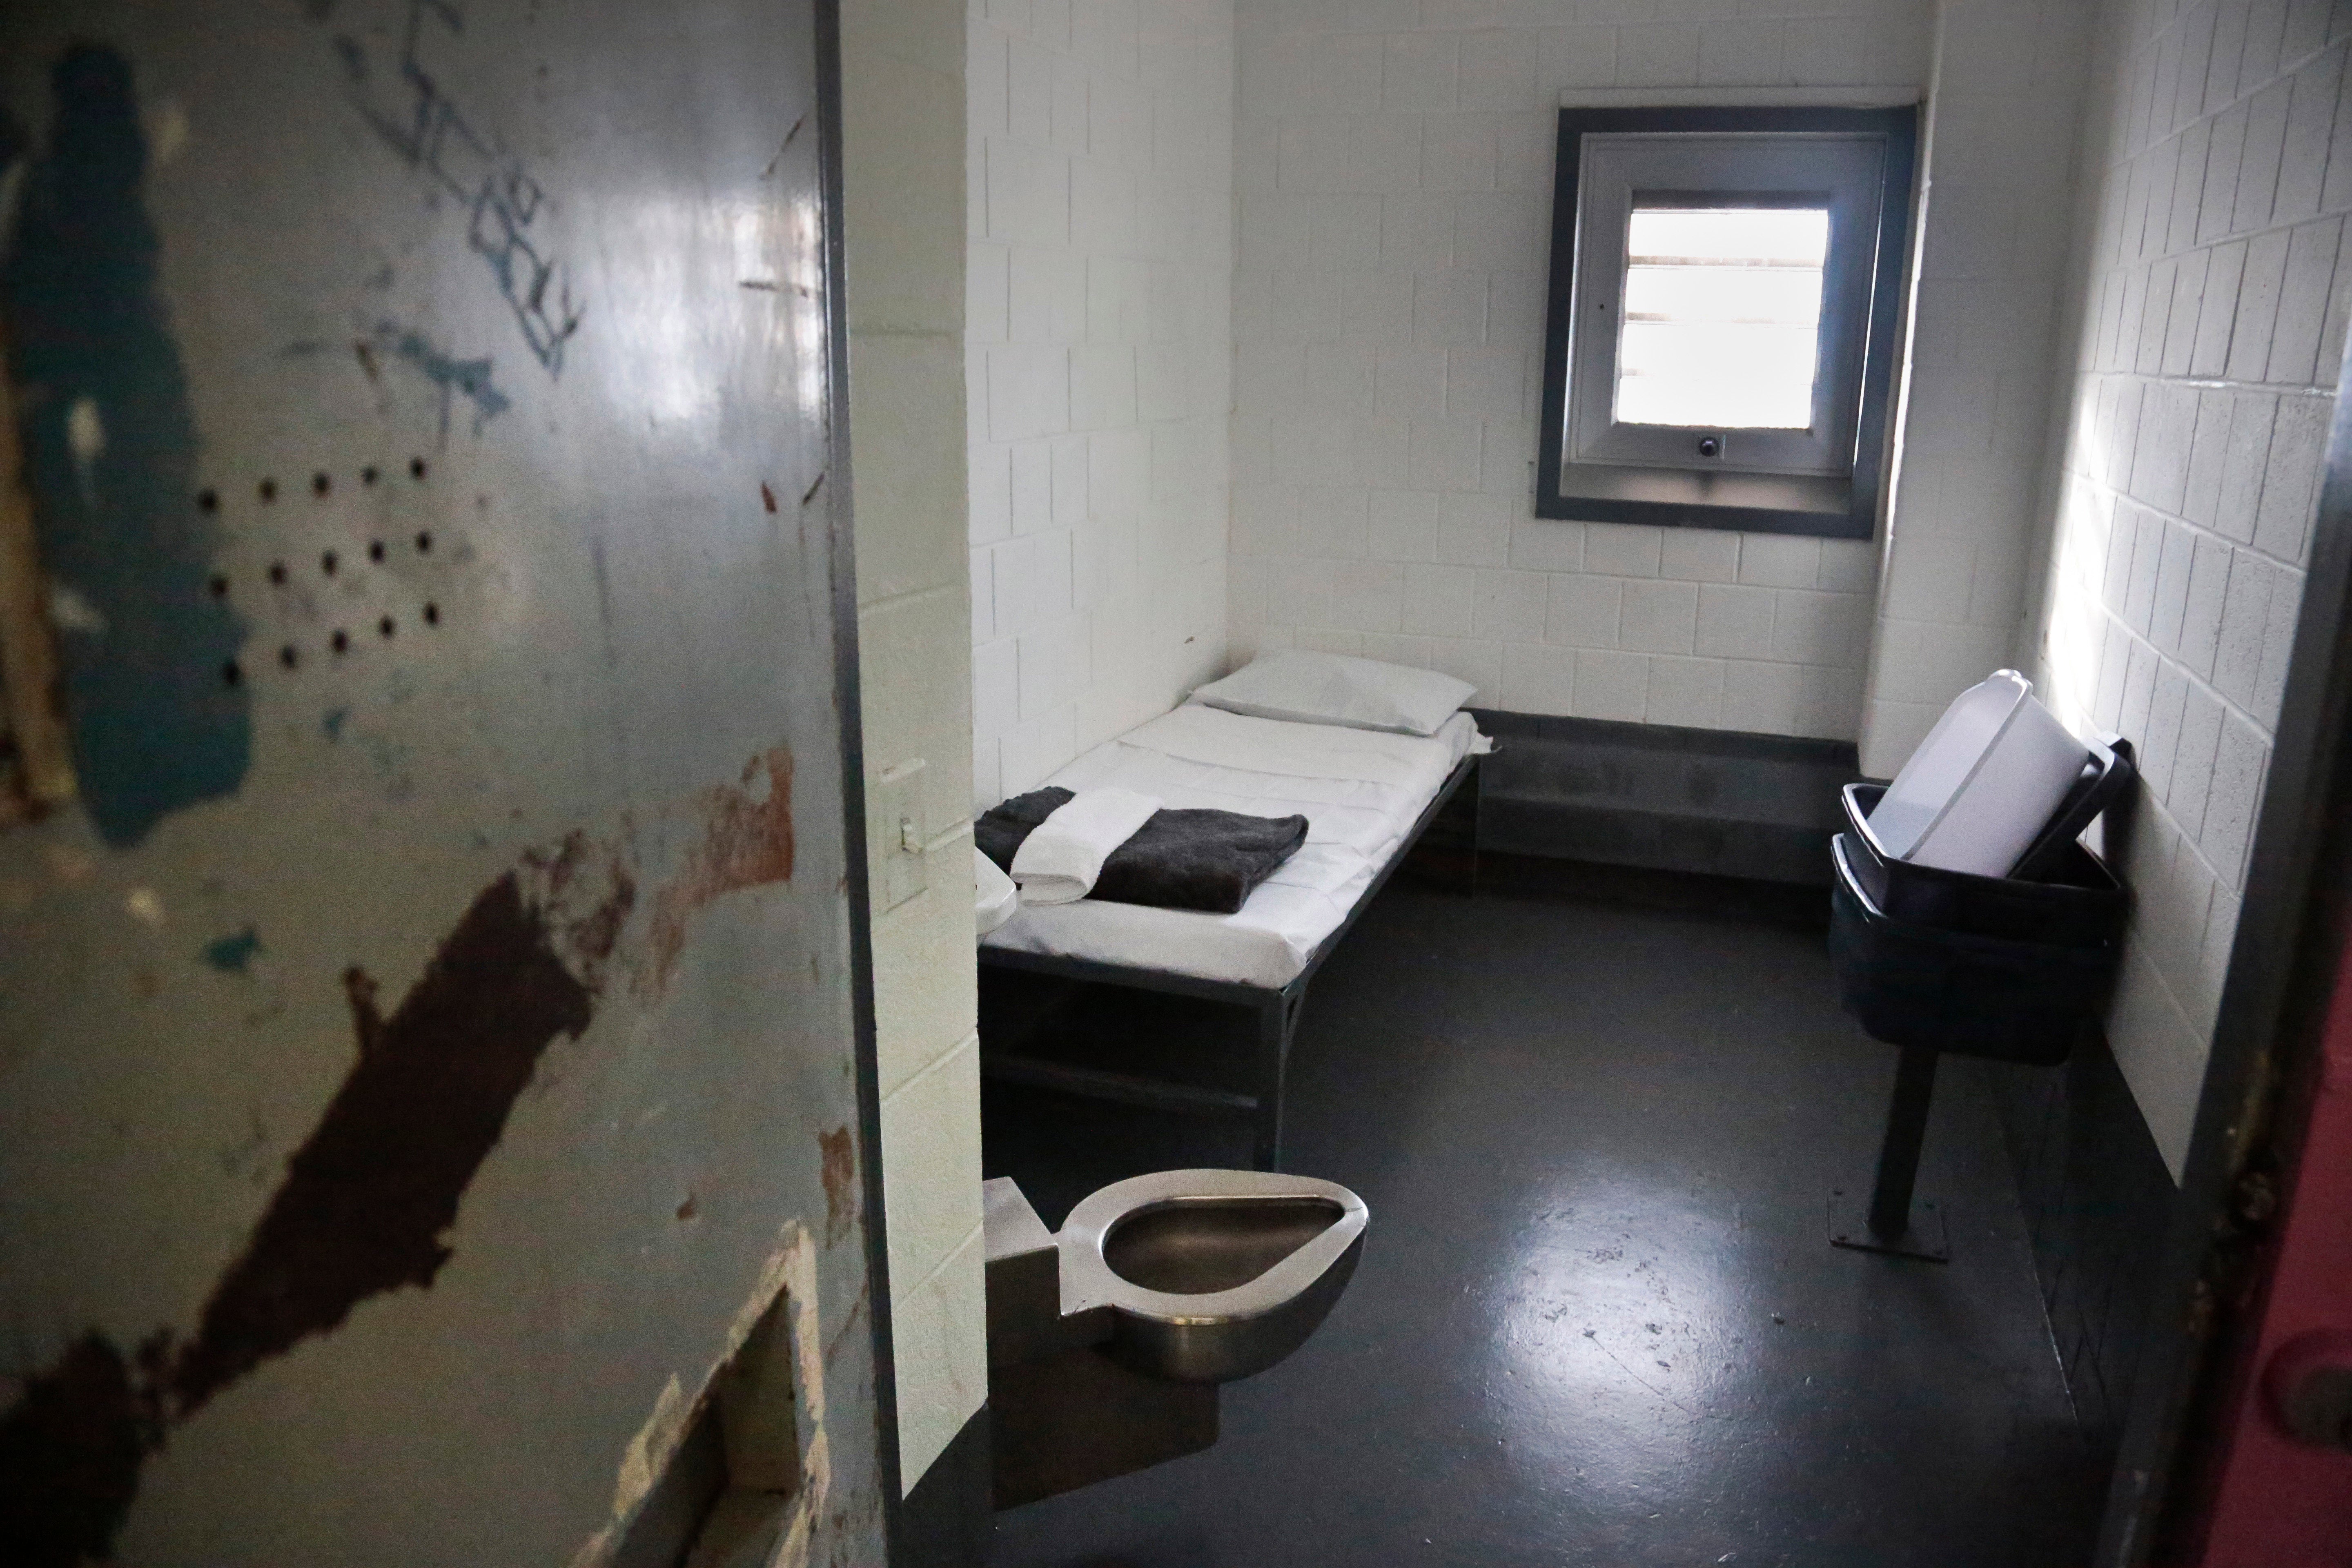 The interior of a solitary confinement cell at New York's Rikers Island jail is shown Jan. 28, 2016. New York City lawmakers have passed a bill meant to ban solitary confinement in the city's jails. The bill overwhelmingly approved Wednesday, Dec. 20, 2023, still allows jails to isolate inmates for a maximum of four hours in "de-escalation" units. (AP Photo/Bebeto Matthews, File)